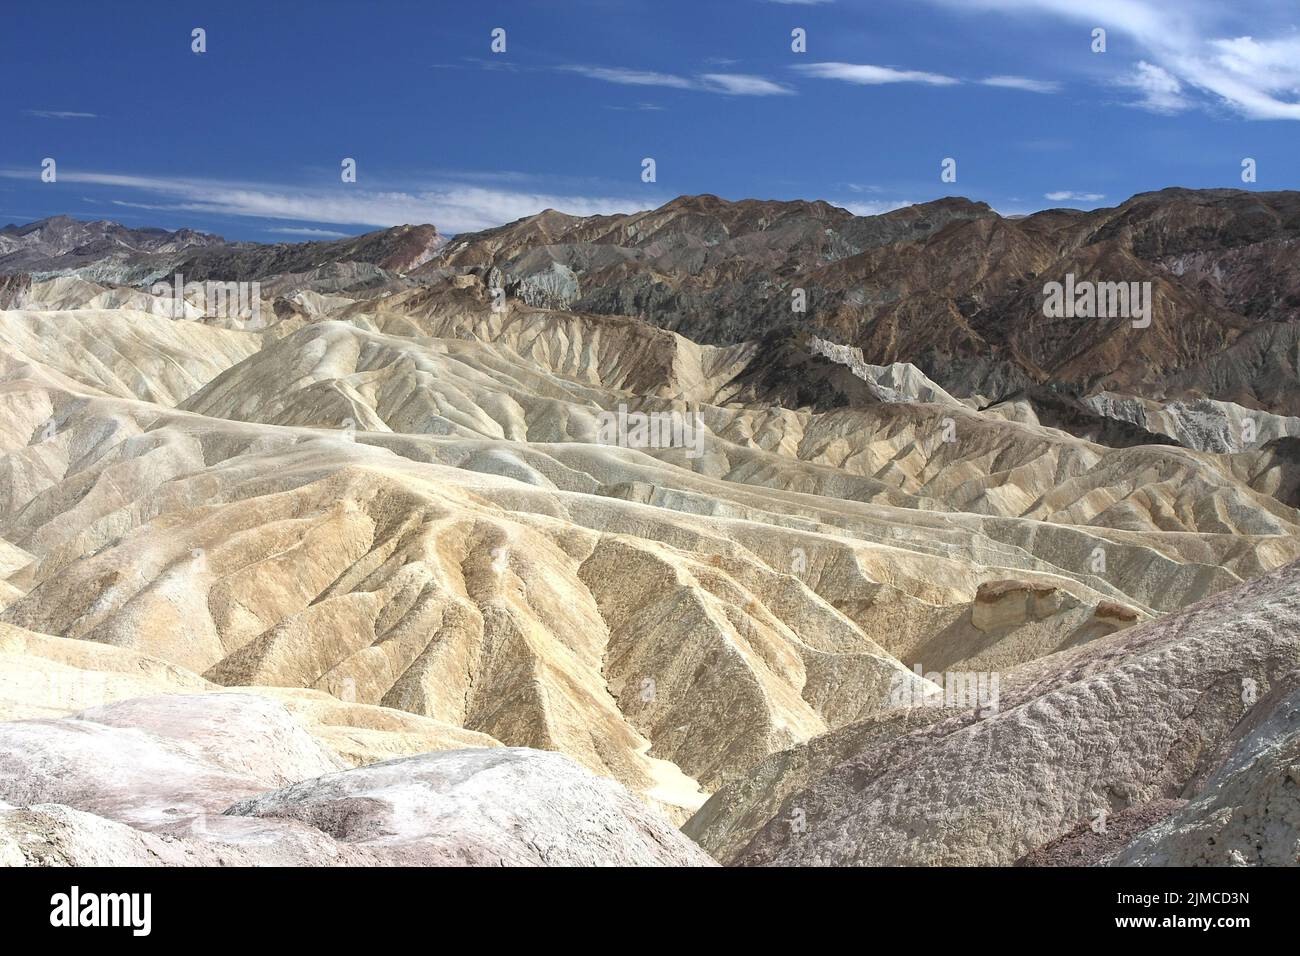 Rock formations, Death Valley National Park, Mojave Desert, California, USA Stock Photo